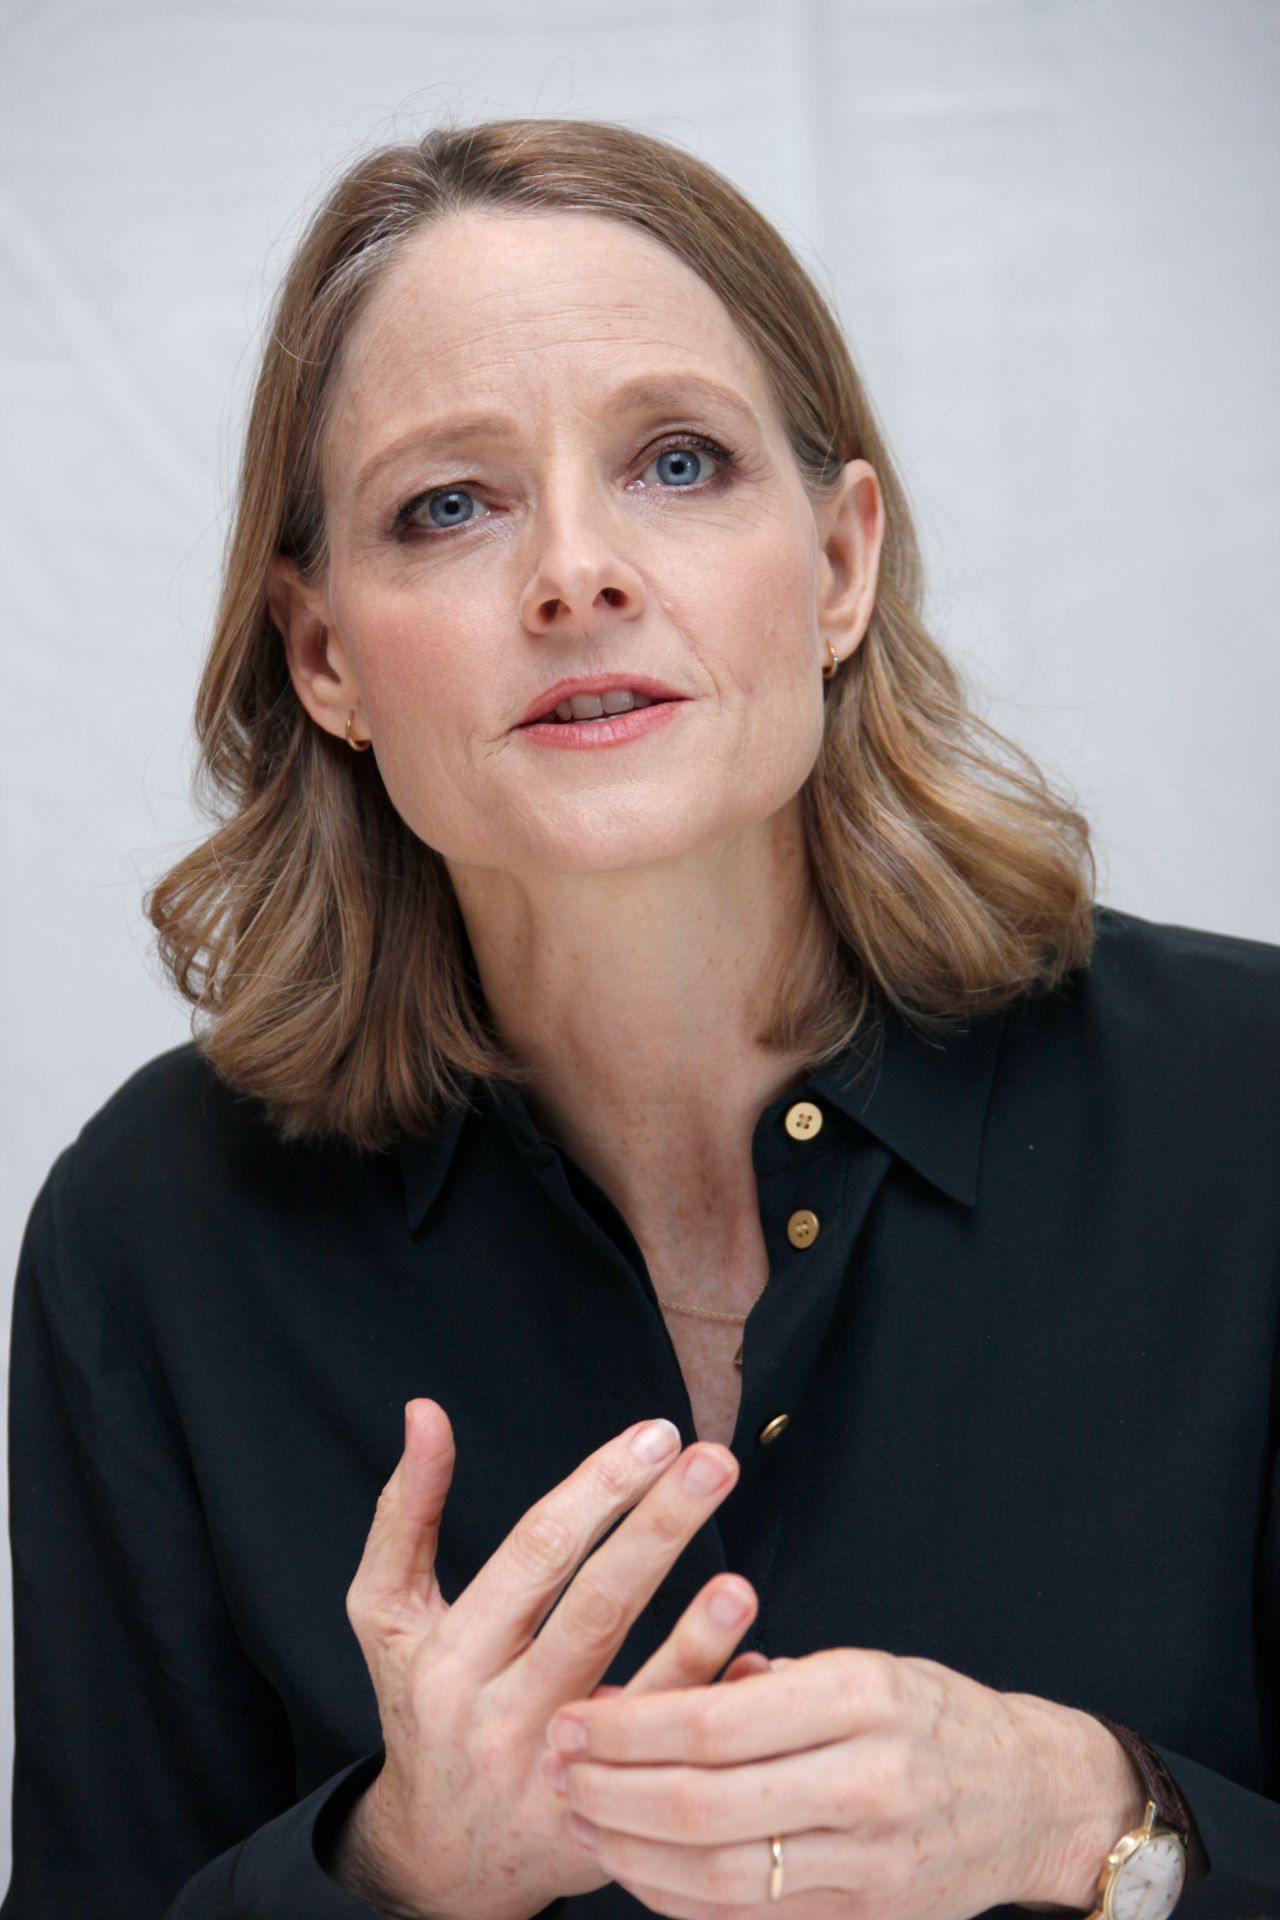 Jodie Foster Press Conference Portraits at Four Seasons Hotel in